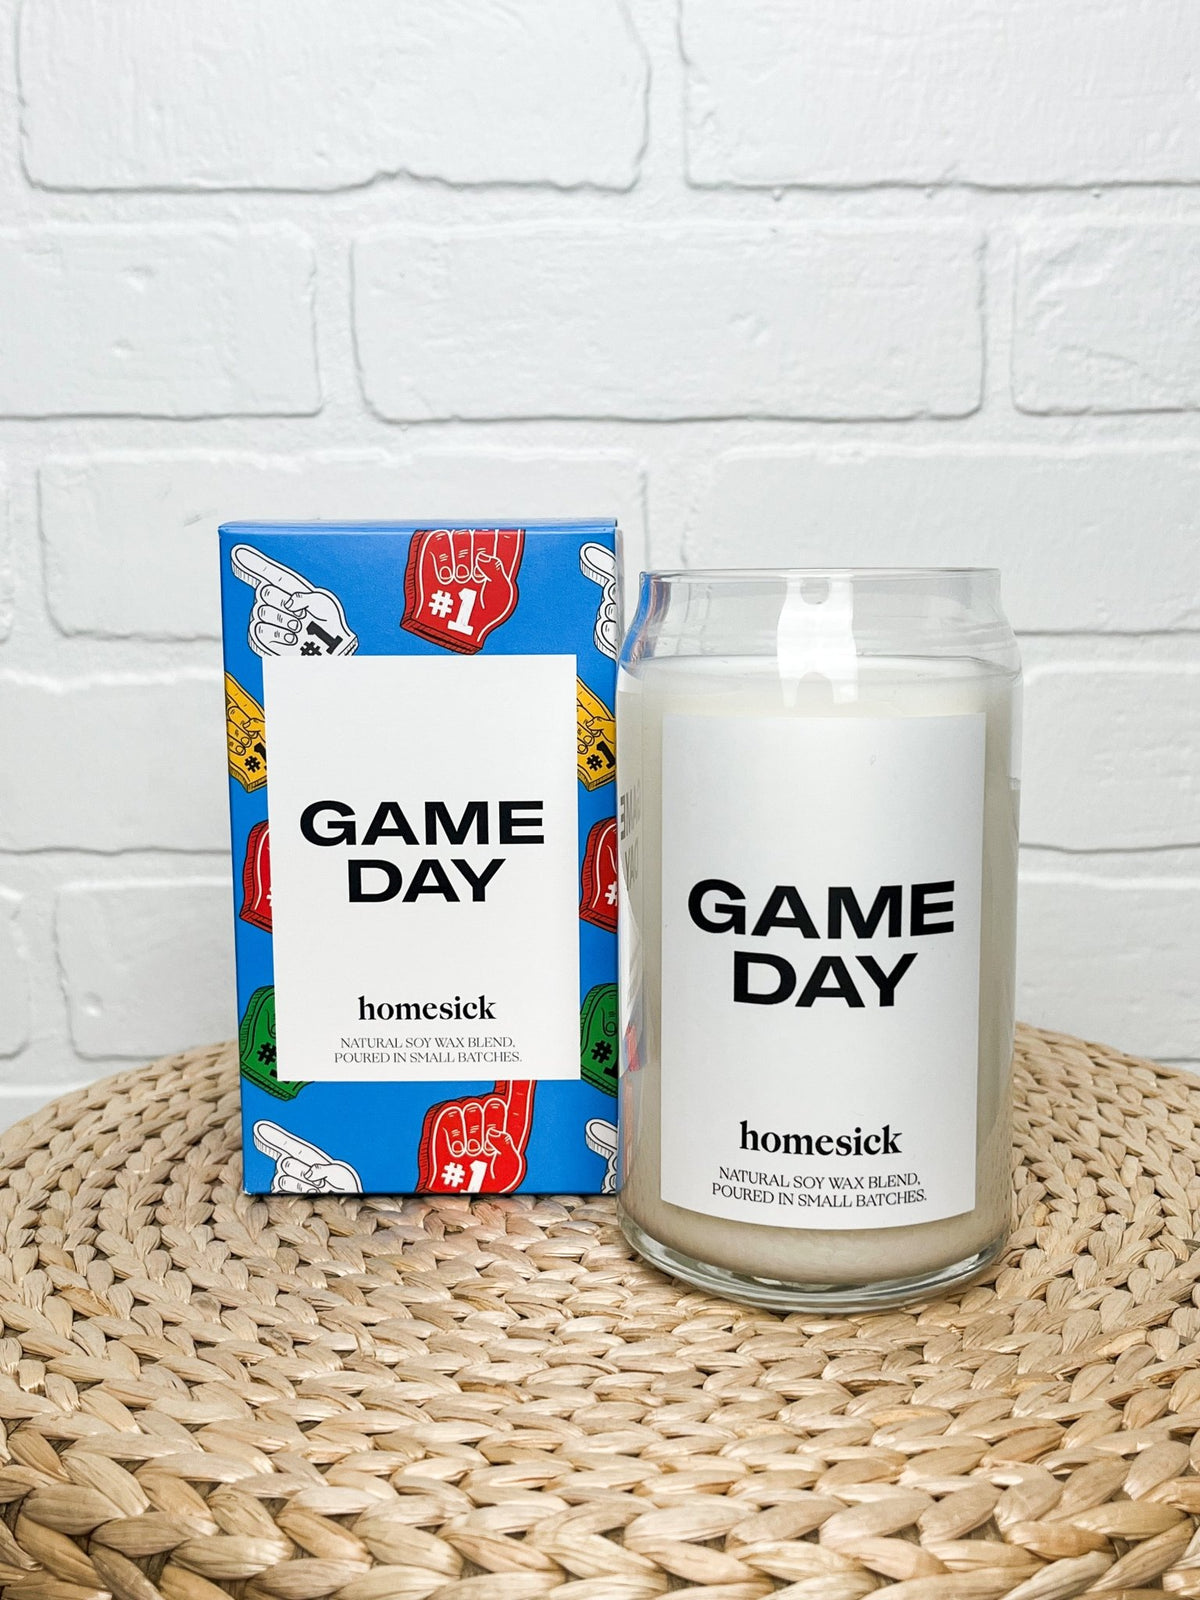 Homesick Game Day candle - Trendy Candles at Lush Fashion Lounge Boutique in Oklahoma City